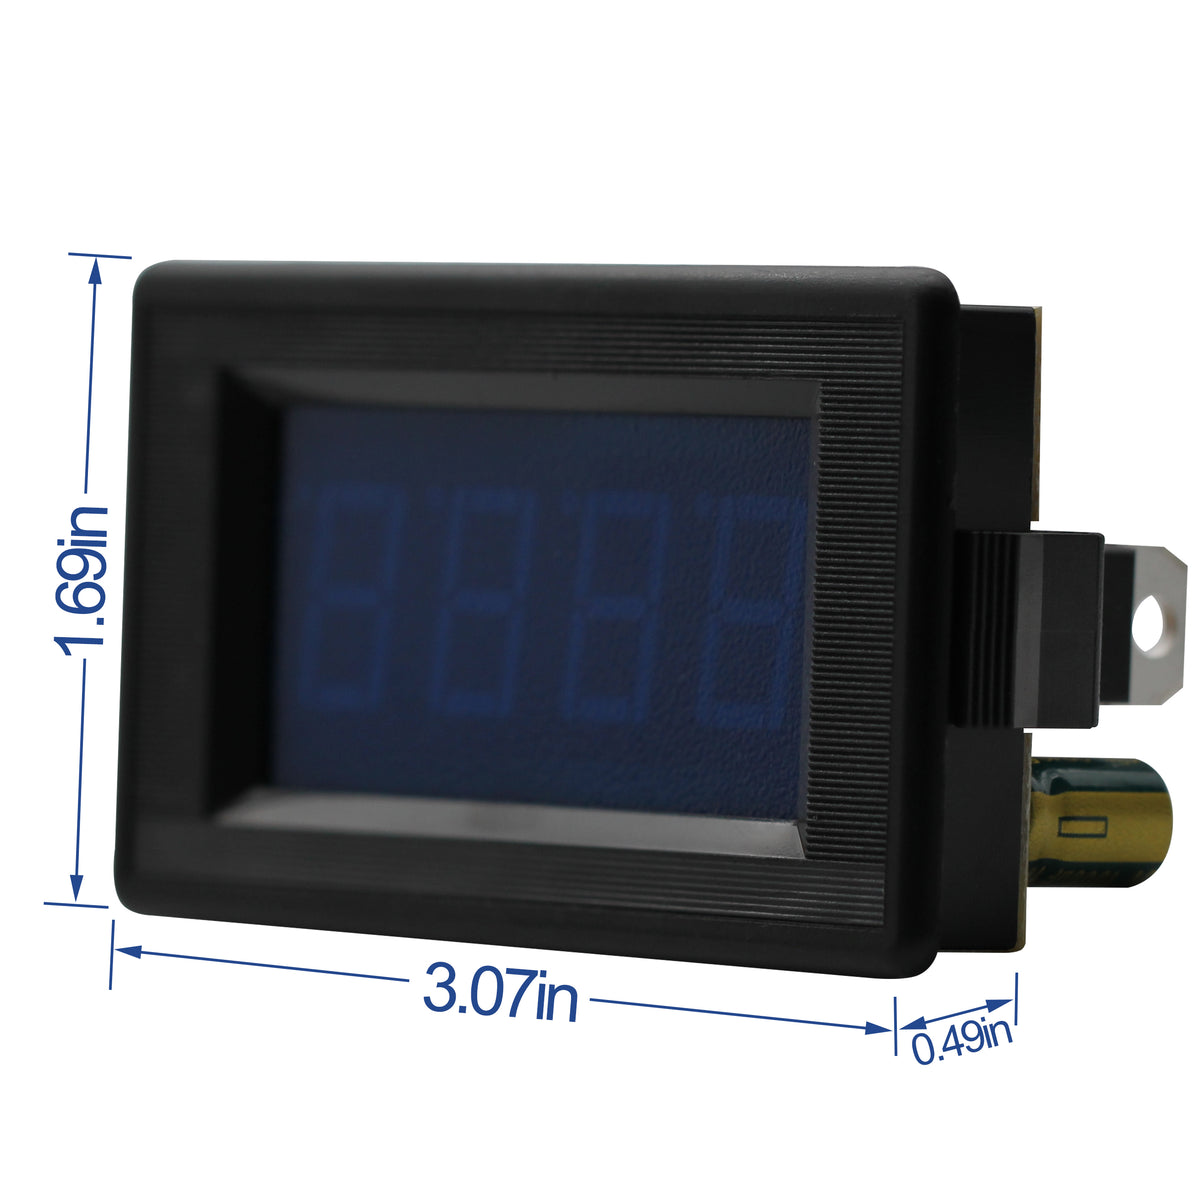 Digit Counter Blue DC 8-24V 4 Digit LED Digital Display 0-9999 Up//Down Plus//Minus Panel Counter Meter with Cable